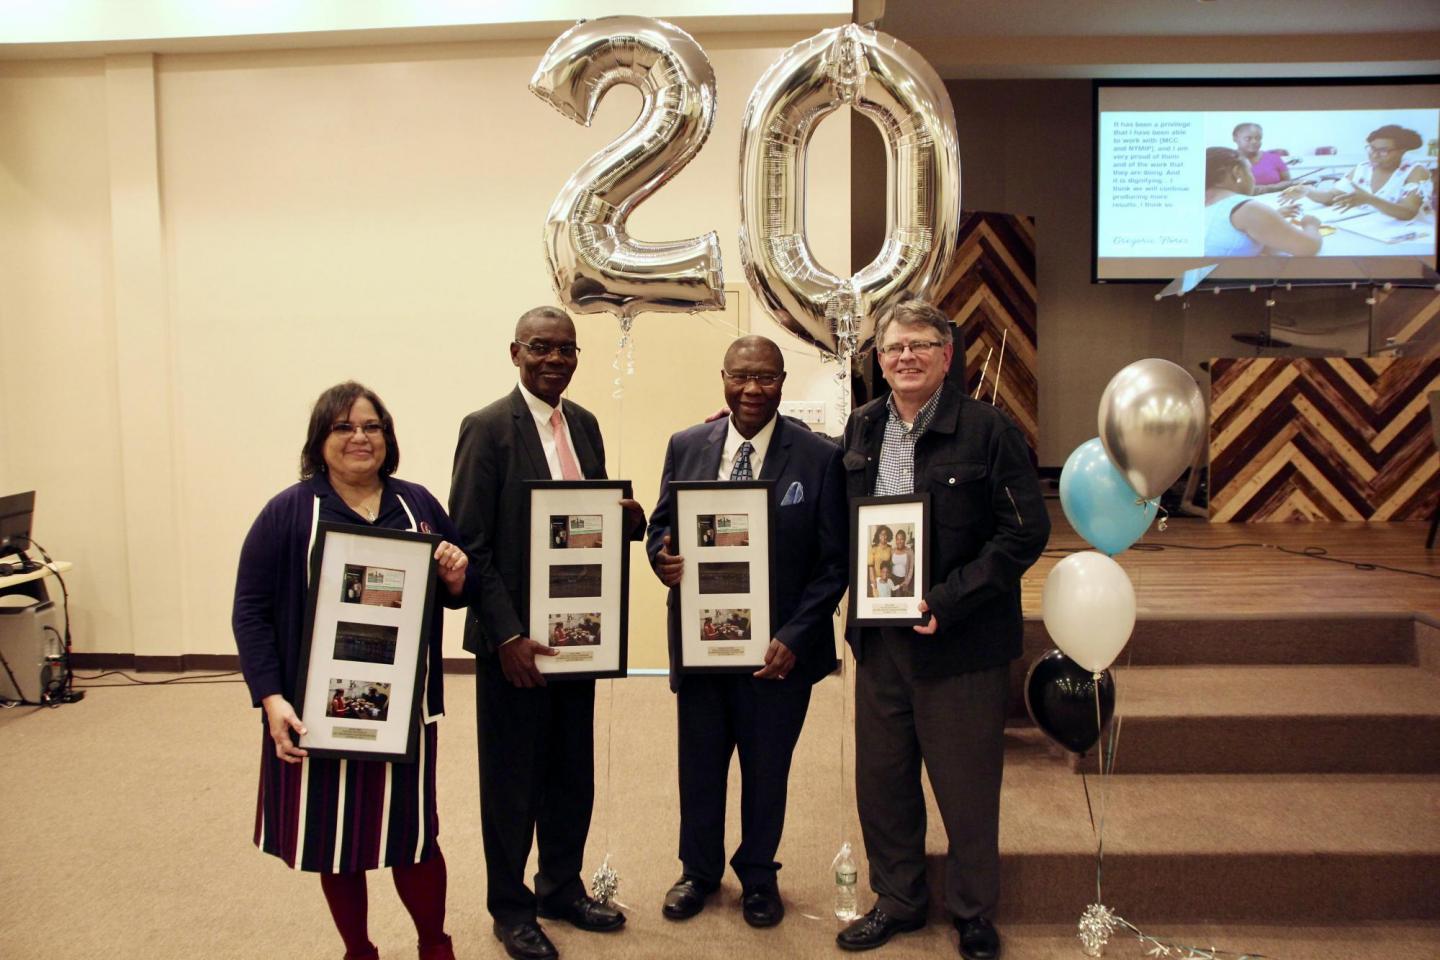 Four people holding picture frames stand together at an event. Behind them are mylar balloons in the shape of the number 20.